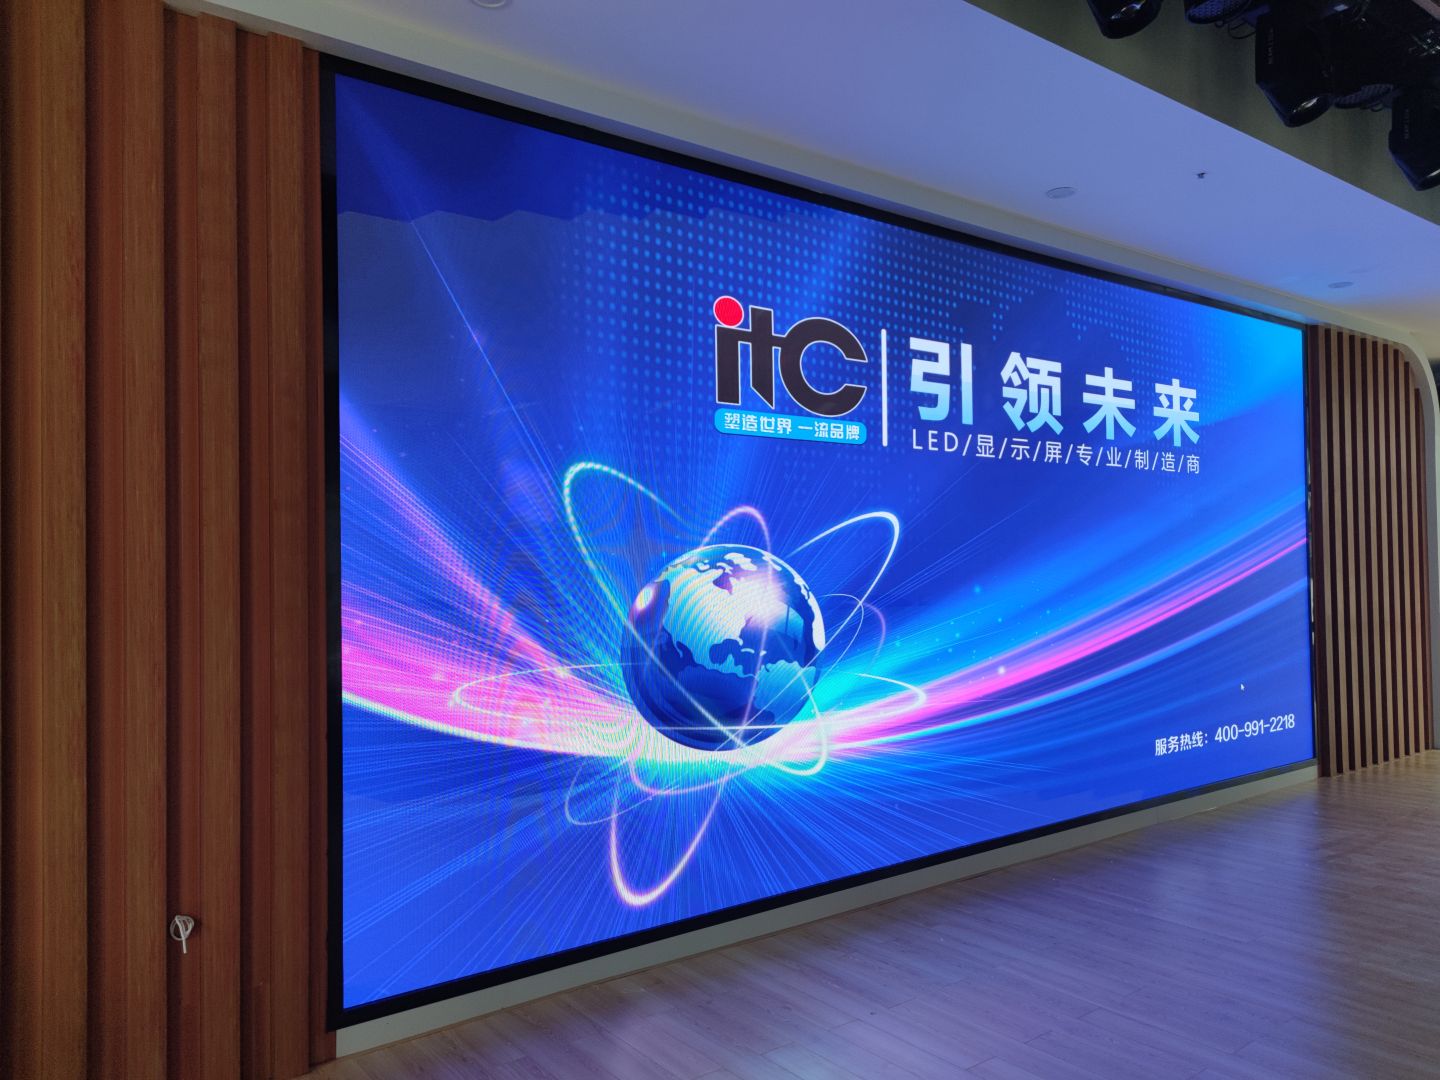 itc LED Product Knowledge - 3 Basic Designs Full-color LED Display for  Stage Solution - itc LED Video Wall Supplier